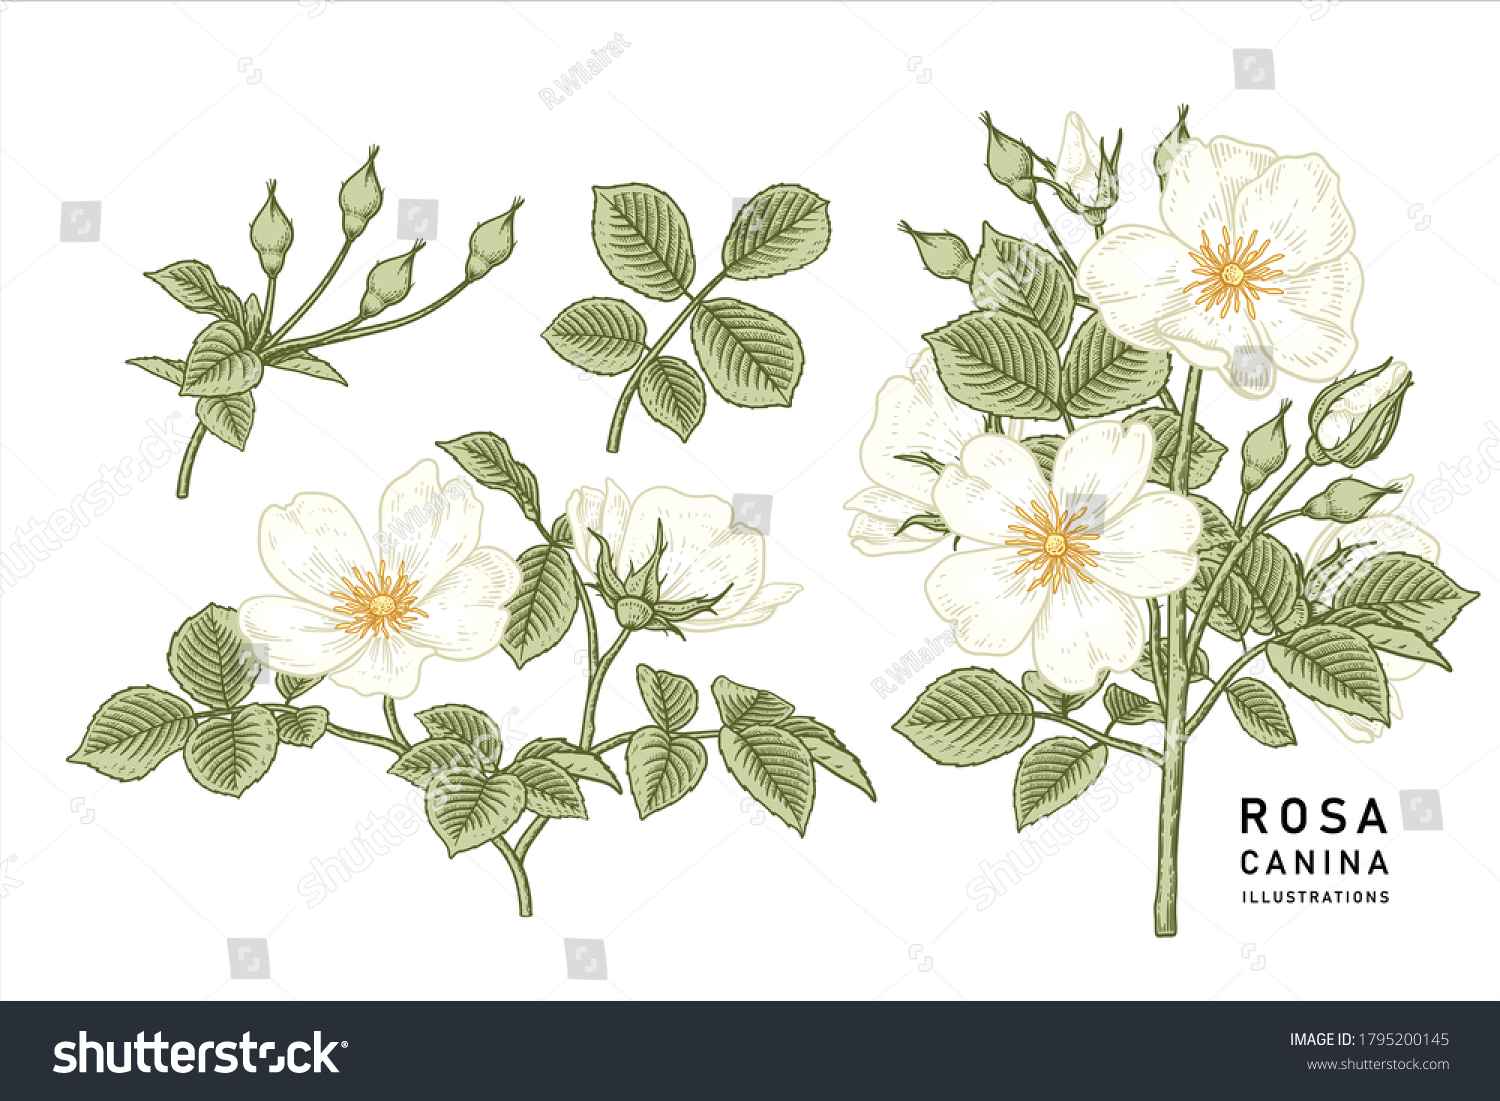 Sketch Floral decorative set. White Dog rose (Rosa canina) flower drawings. Vintage line art isolated on white backgrounds. Hand Drawn Botanical Illustrations. Elements vector. #1795200145